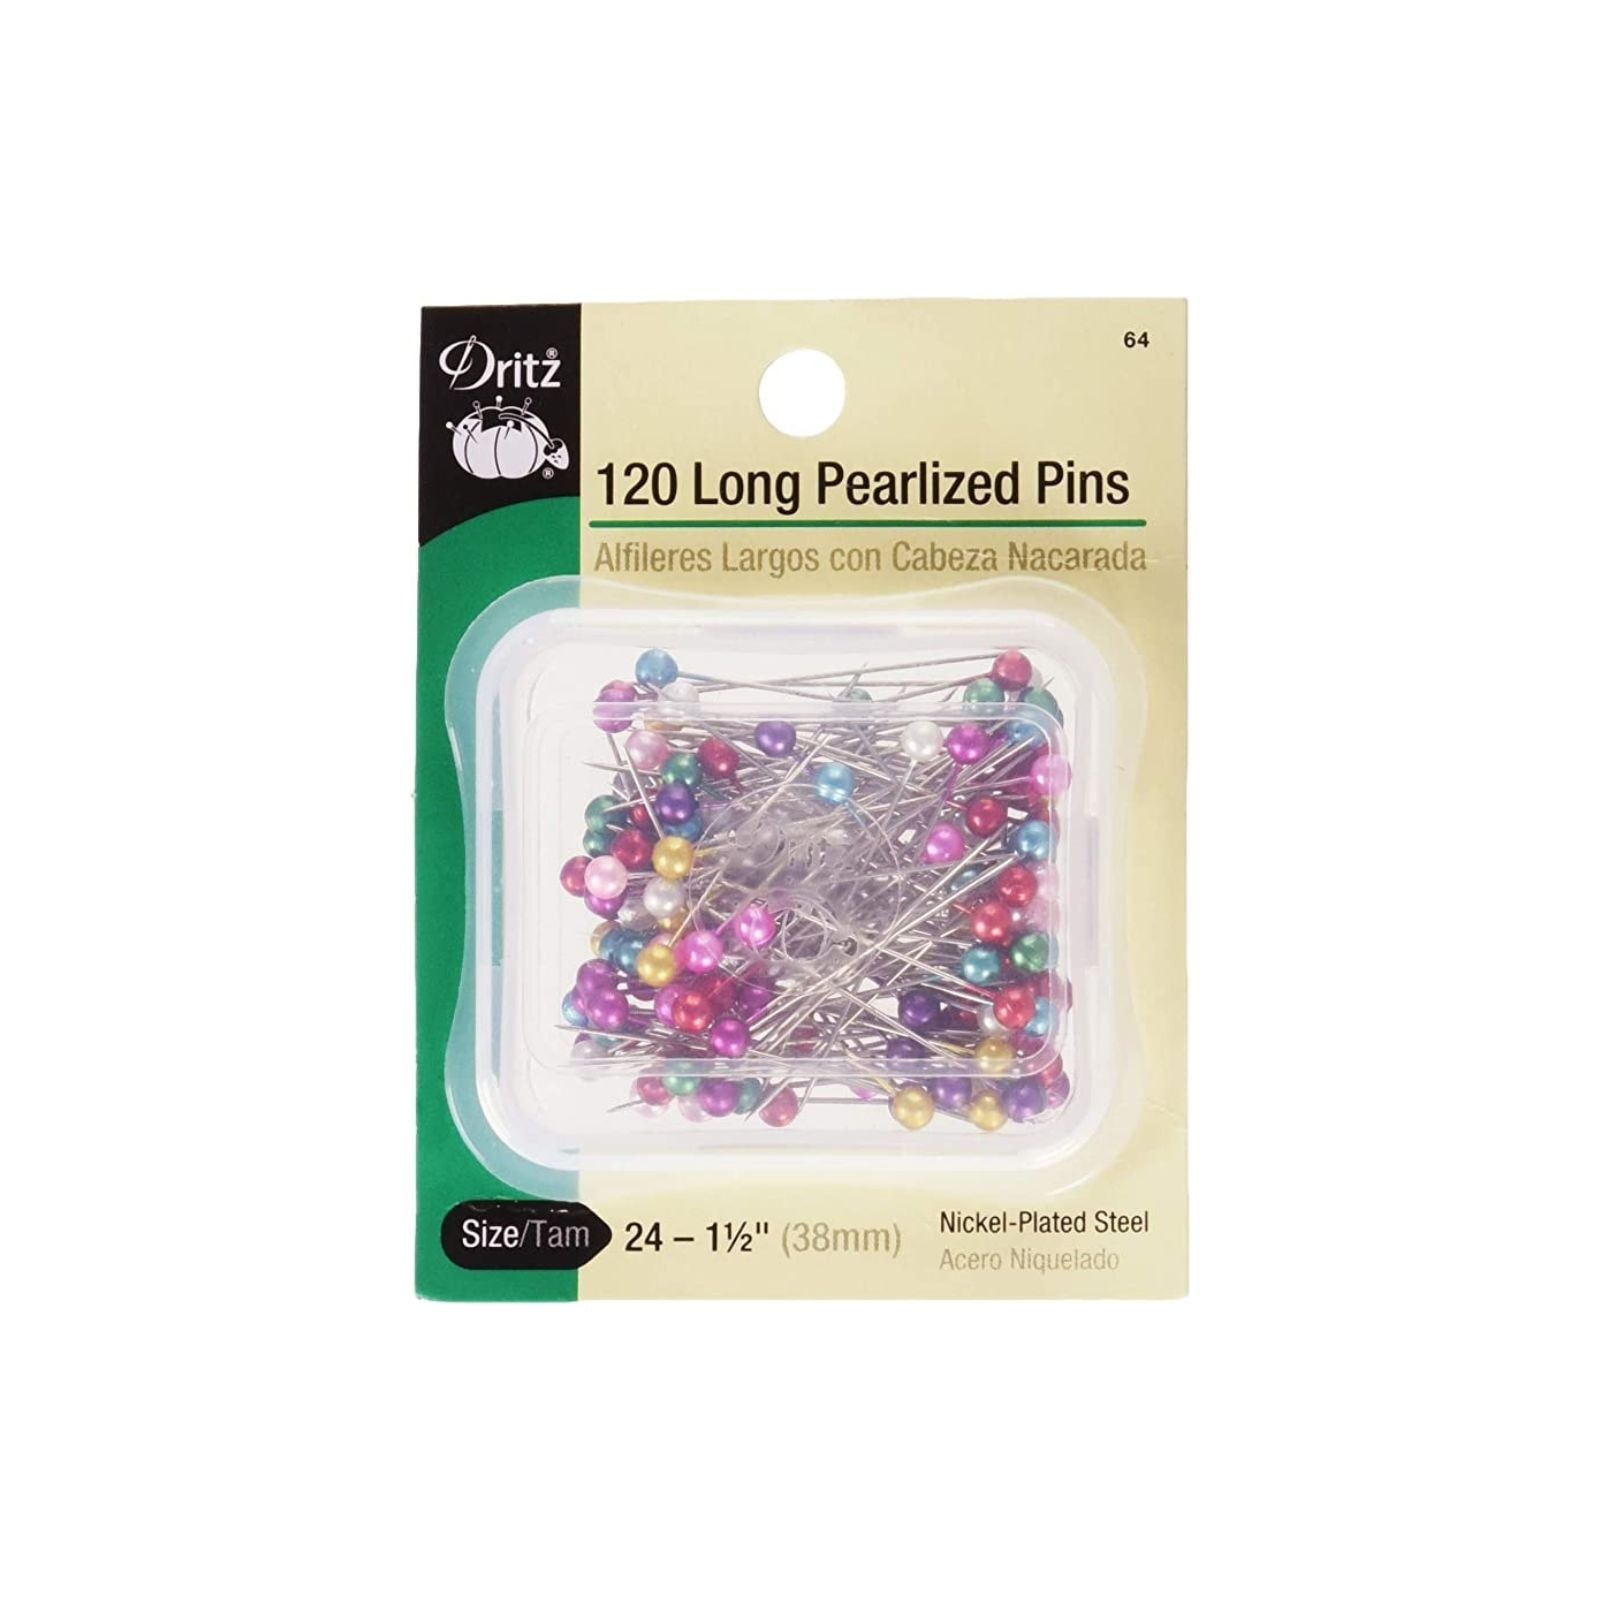 Dritz Pins - 1.5in Long Pearlized 120 ct.